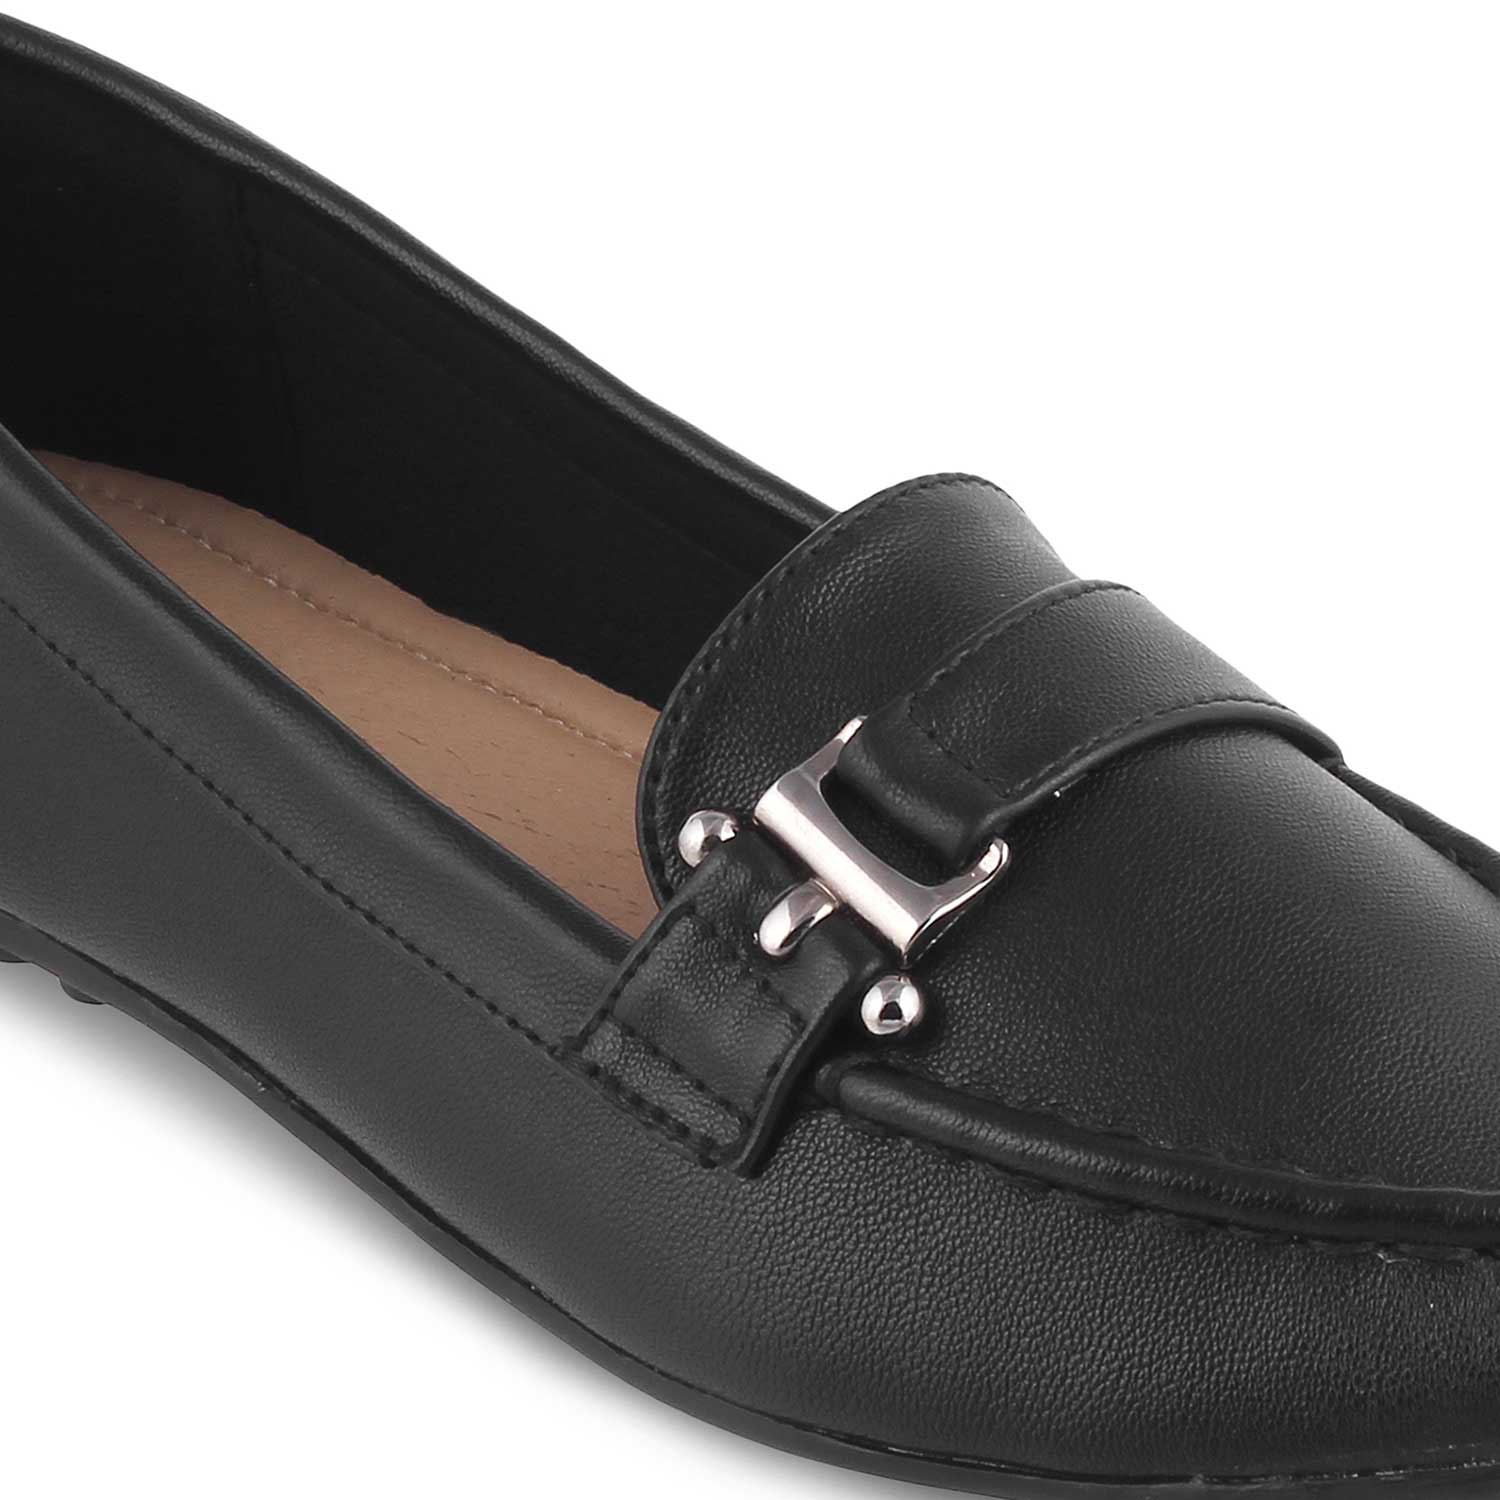 The Lativa Black Women's Dress Loafers Tresmode - Tresmode